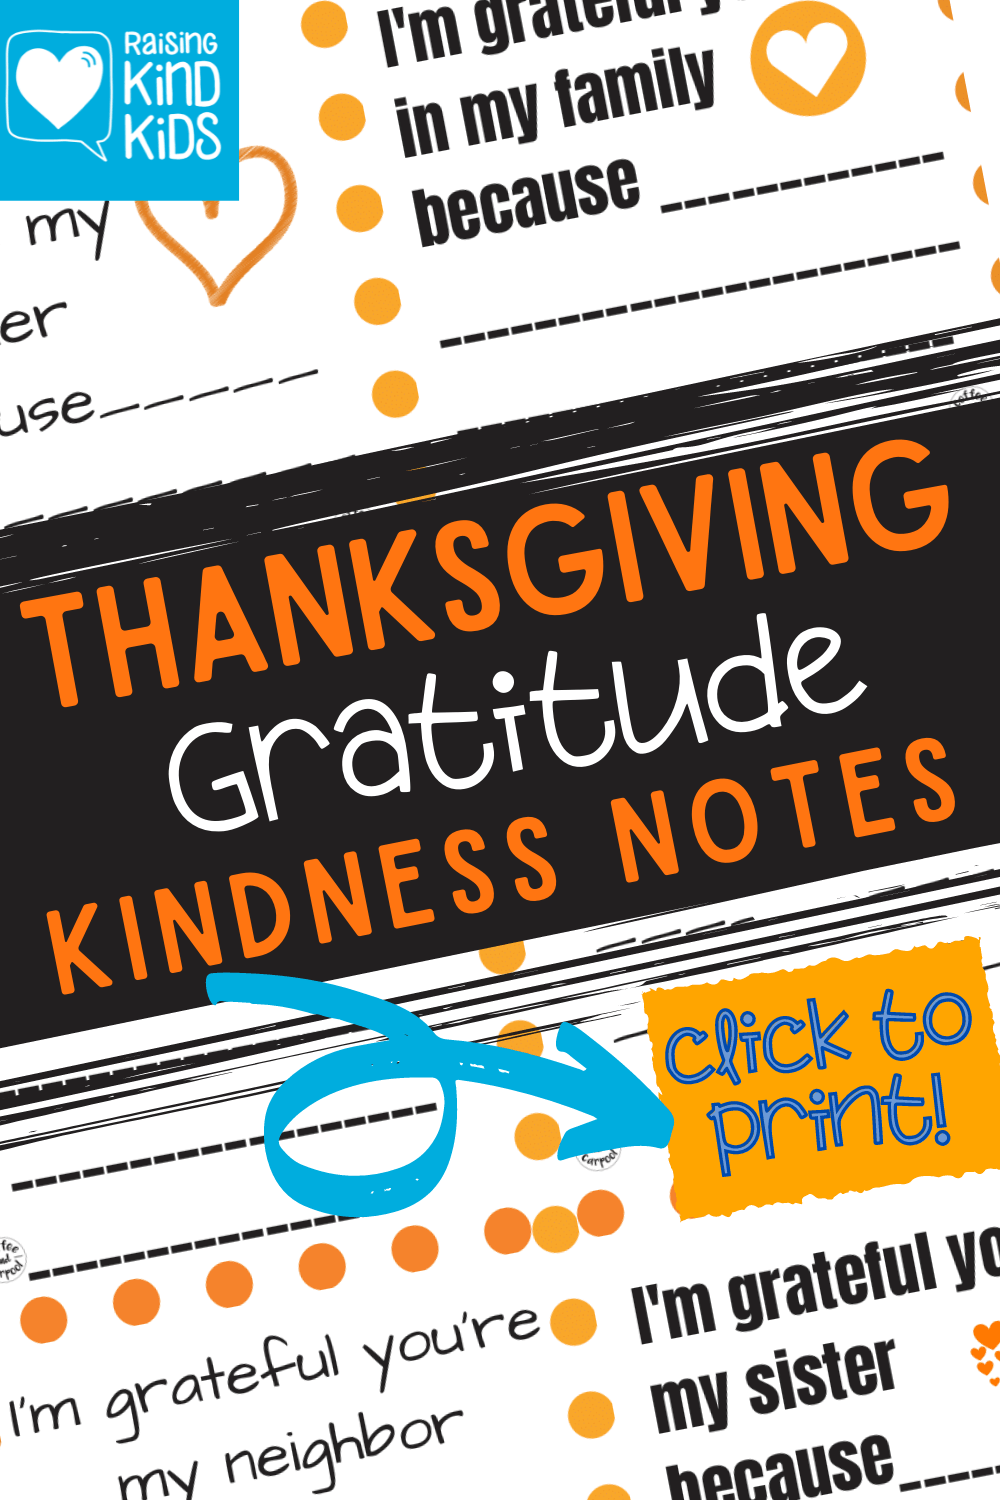 These gratitude kindness notes are a perfect Thanksgiving activity to help kids focus on why their thankful for the people in their lives. Being grateful and showing gratitude is a special way to make Thanksgiving more meaningful.#thanksgiving #thanksgivingactivity #thanksgivingactivities #thanksgivingactivitiesforkids #gratitude #grateful #thankful #gratitudeactivities #kindness #kindnessactivities #coffeeandcarpool